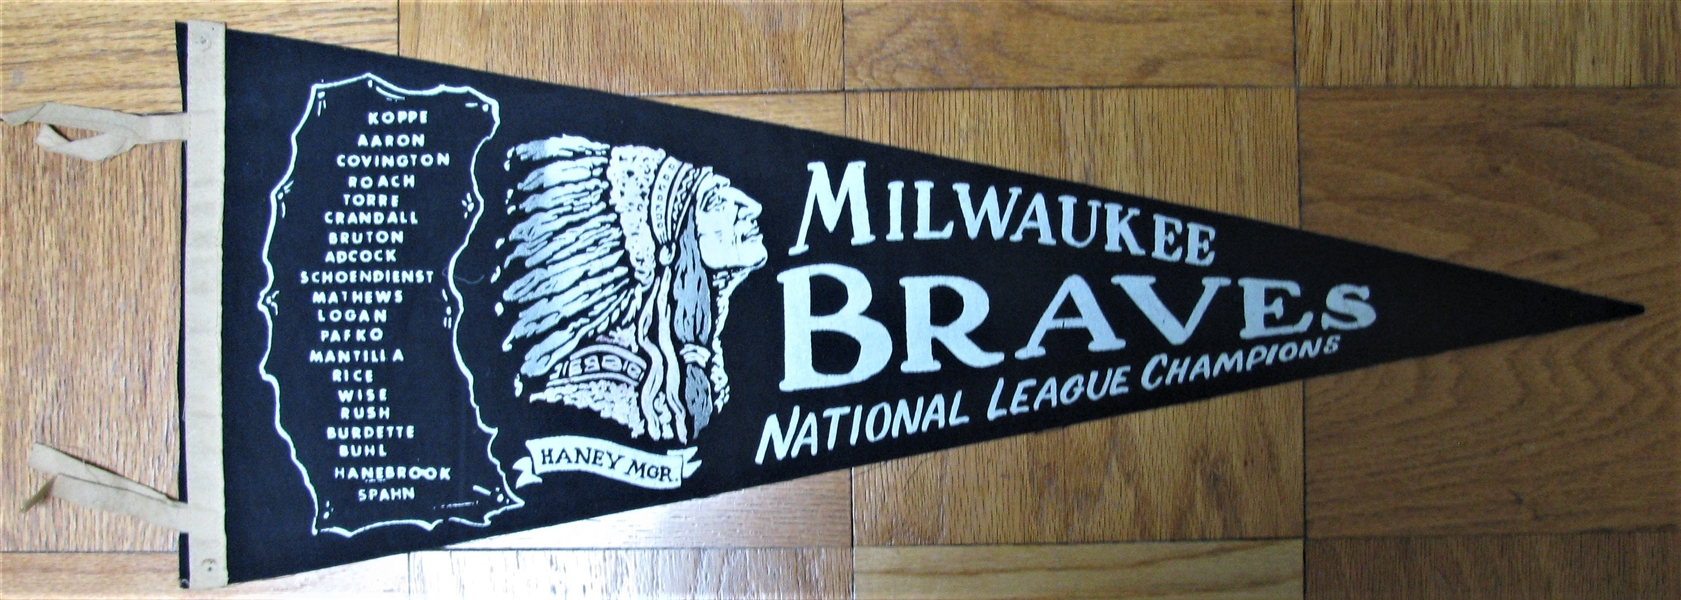 1958 MILWAUKEE BRAVES NATIONAL LEAGUE CHAMPIONS SCROLL PENNANT